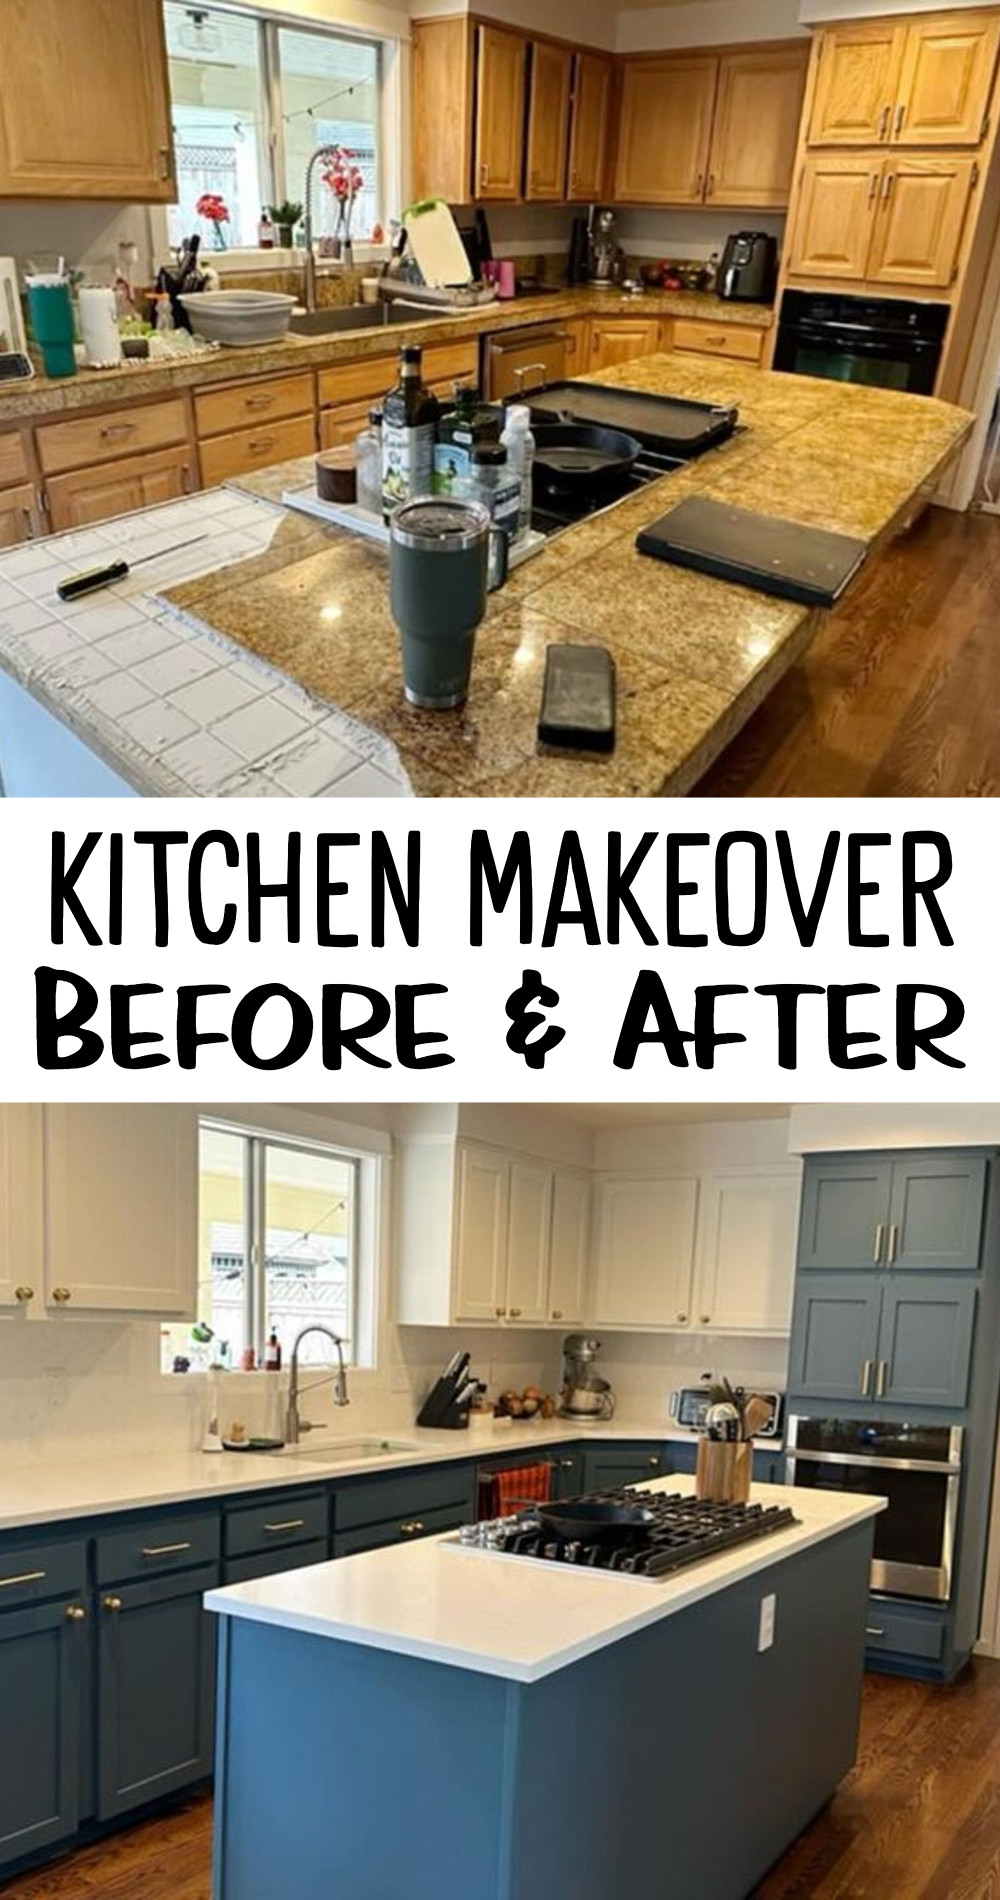 Kitchen Makeover Before and After Painted Cabinets Two Tone Blue and White, quartz countertops, white tile backsplash and new cabinet hardware